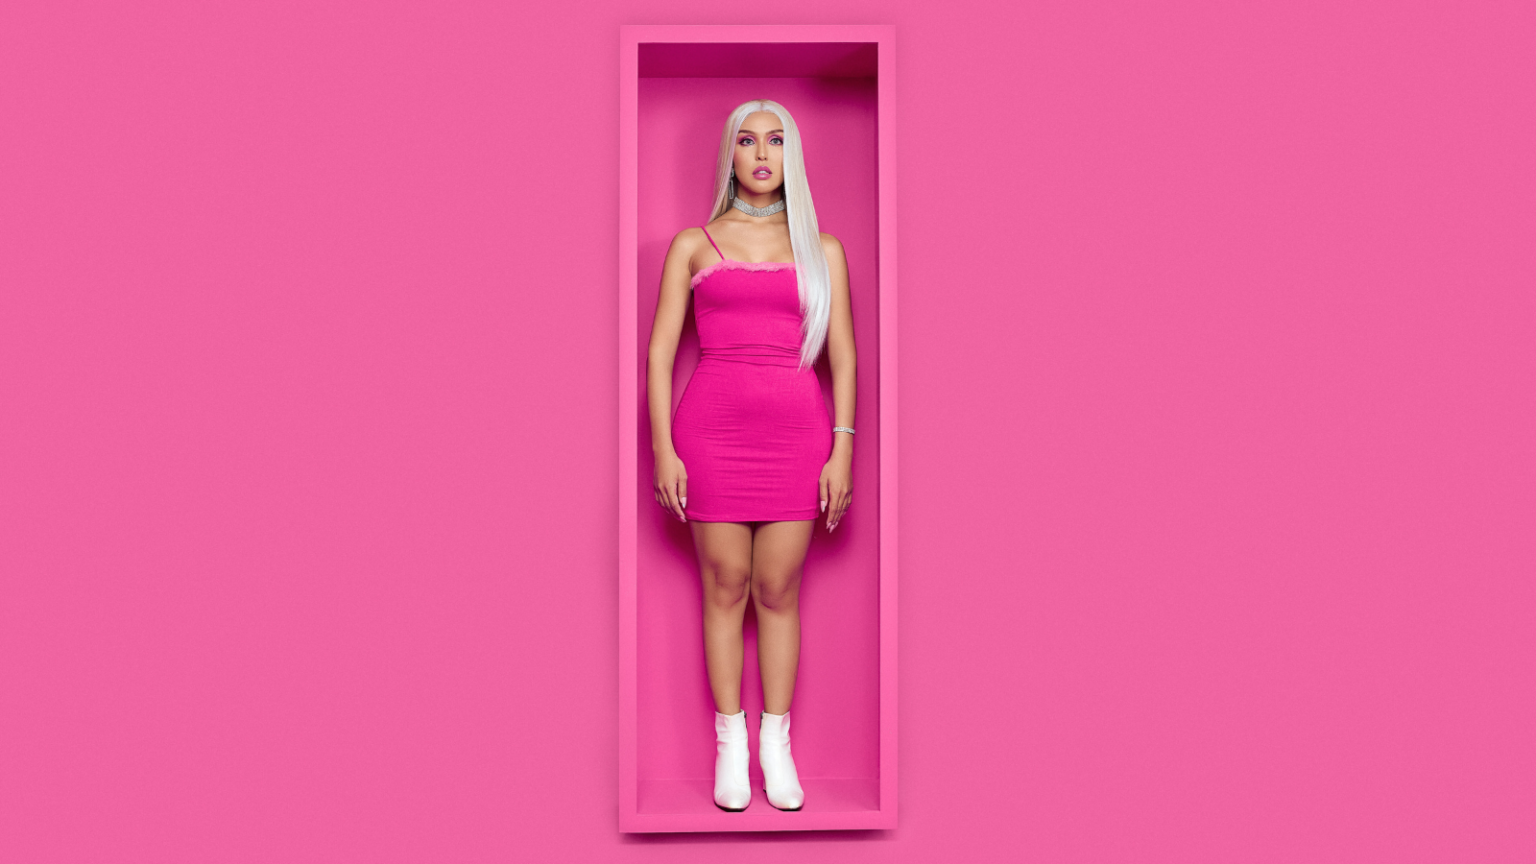 Photo of a thin, blonde feminine person with light skin wearing a hot pink mini dress and standing in a stiff pose inside a large display box